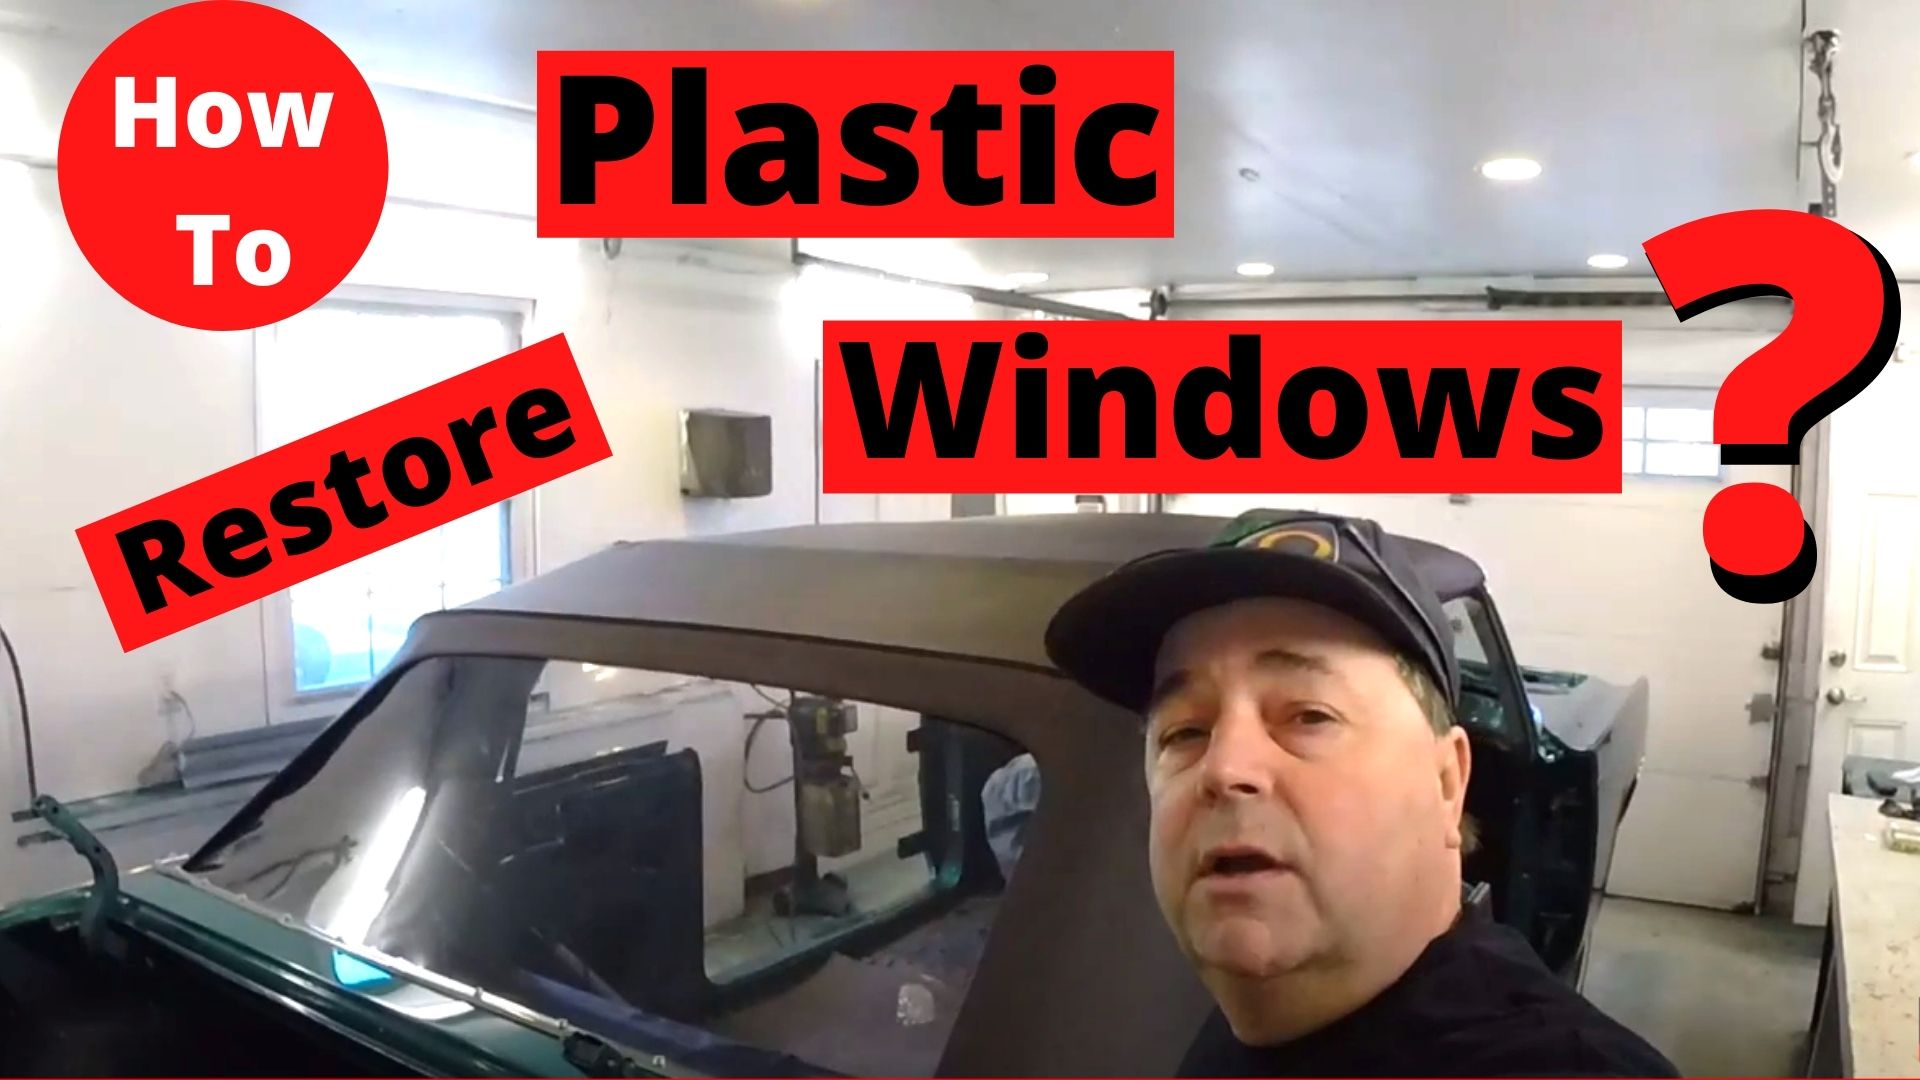 How To Restore Plastic Windows For Convertible, Tops, Jeeps, Boats, & More